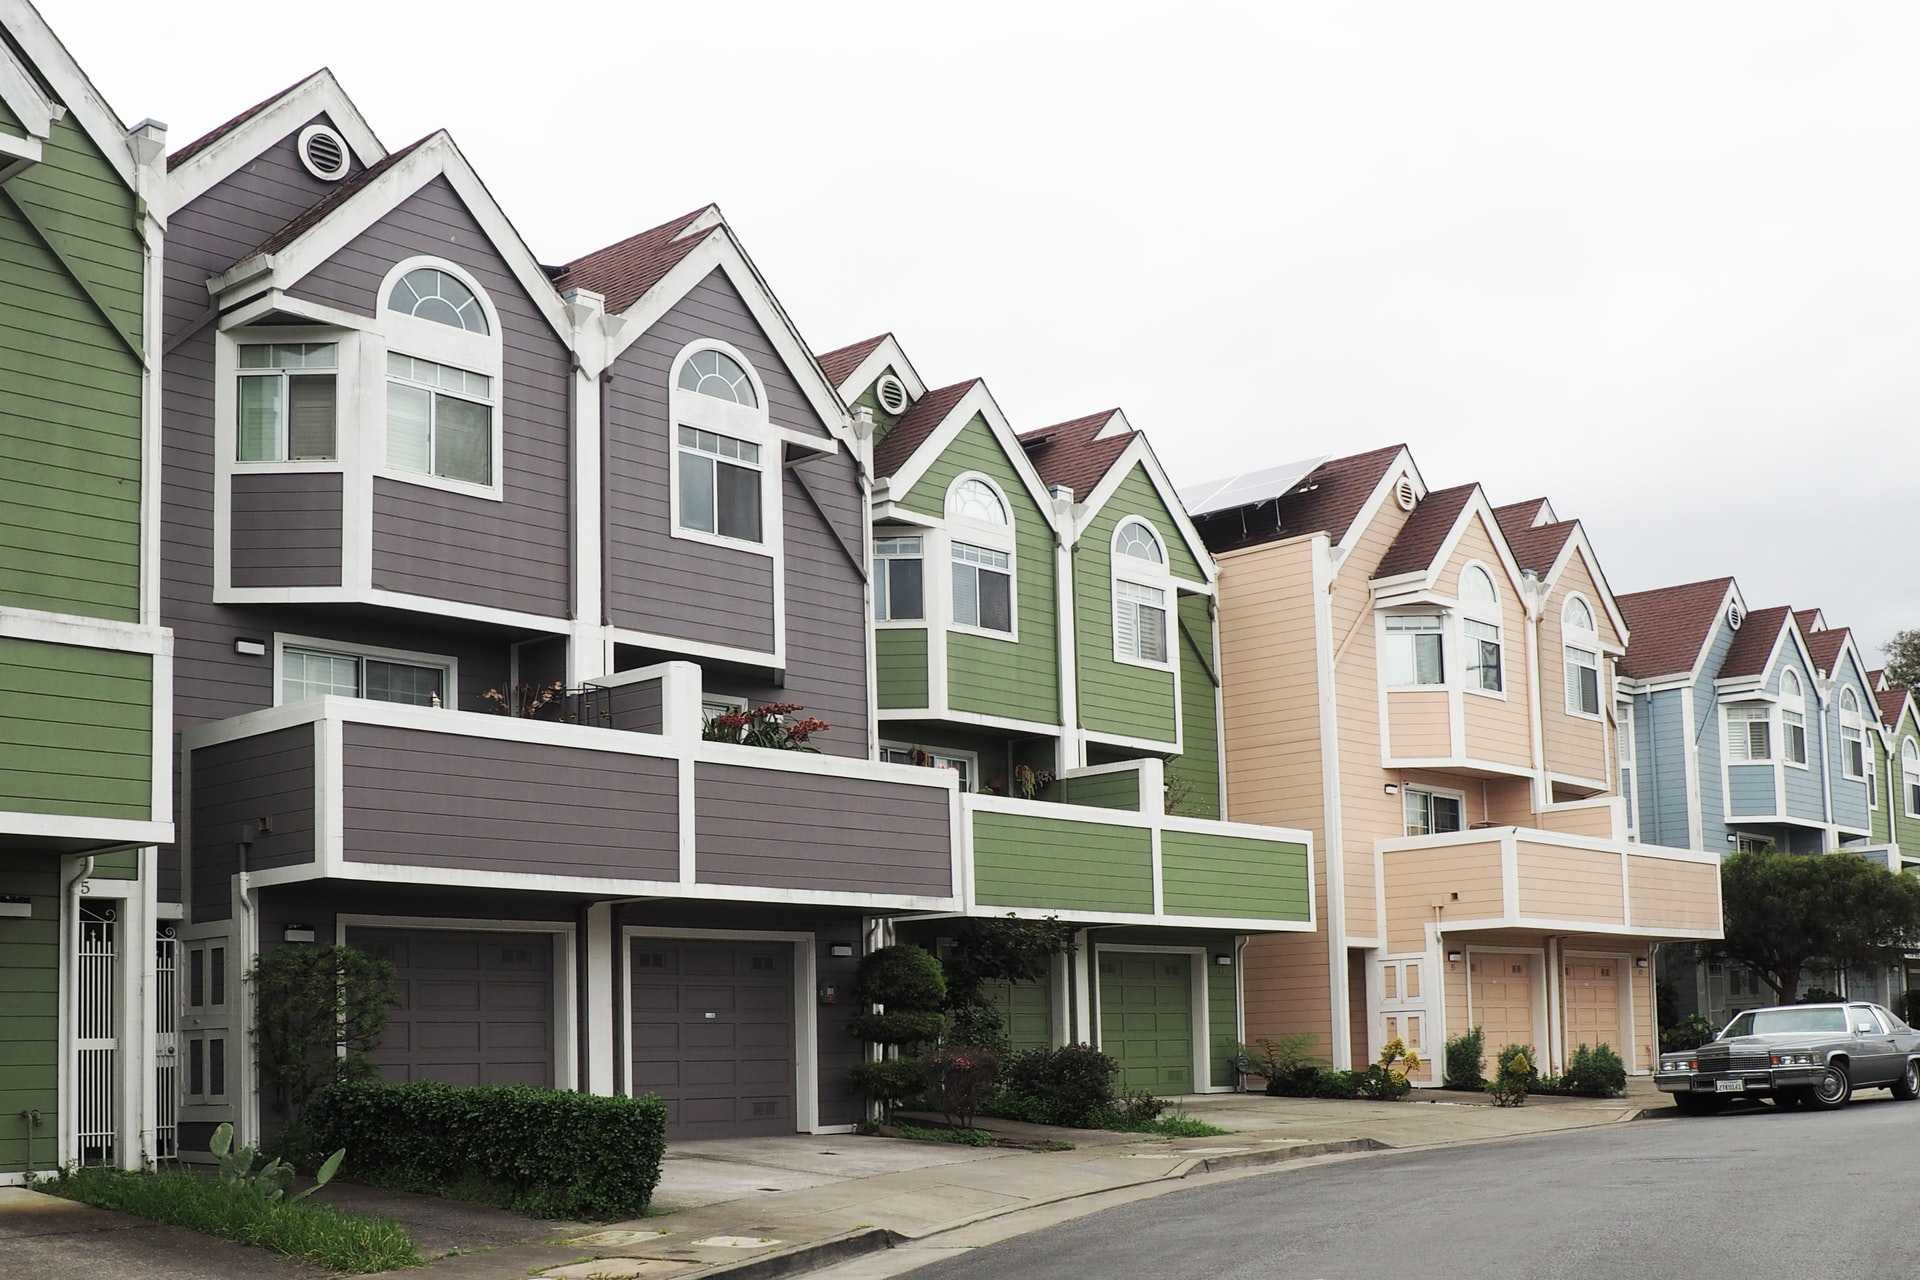 A row of new townhomes with garages in San Francisco.